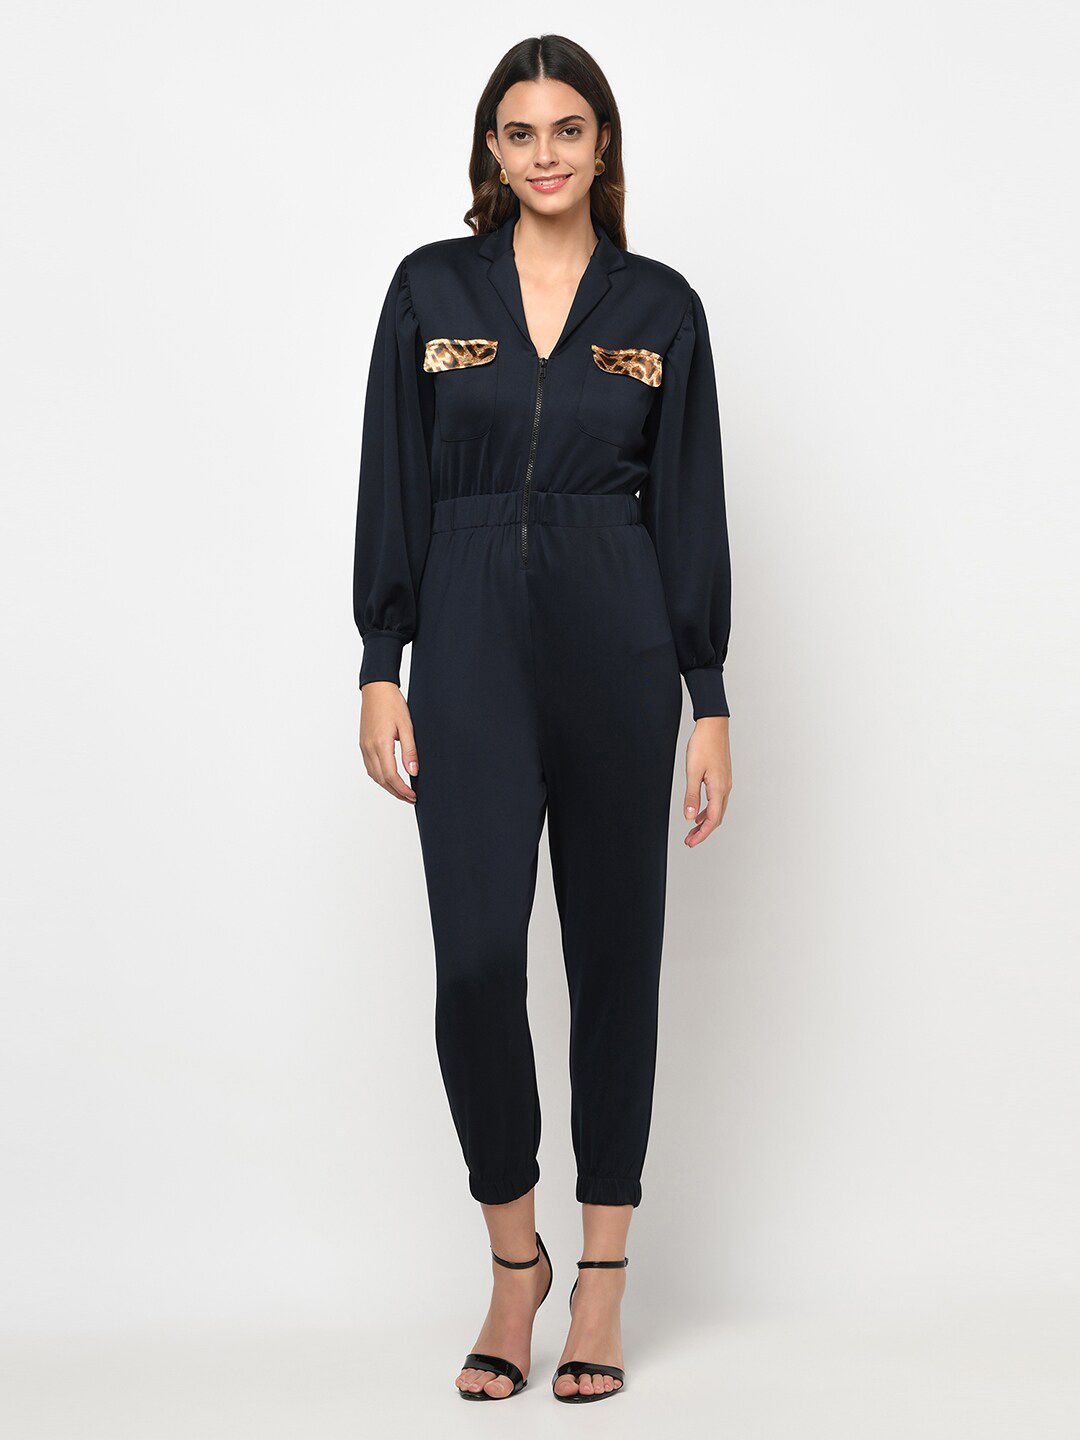 iki chic Navy Blue & Beige Front Zipper Jogger Fit Jumpsuit Price in India